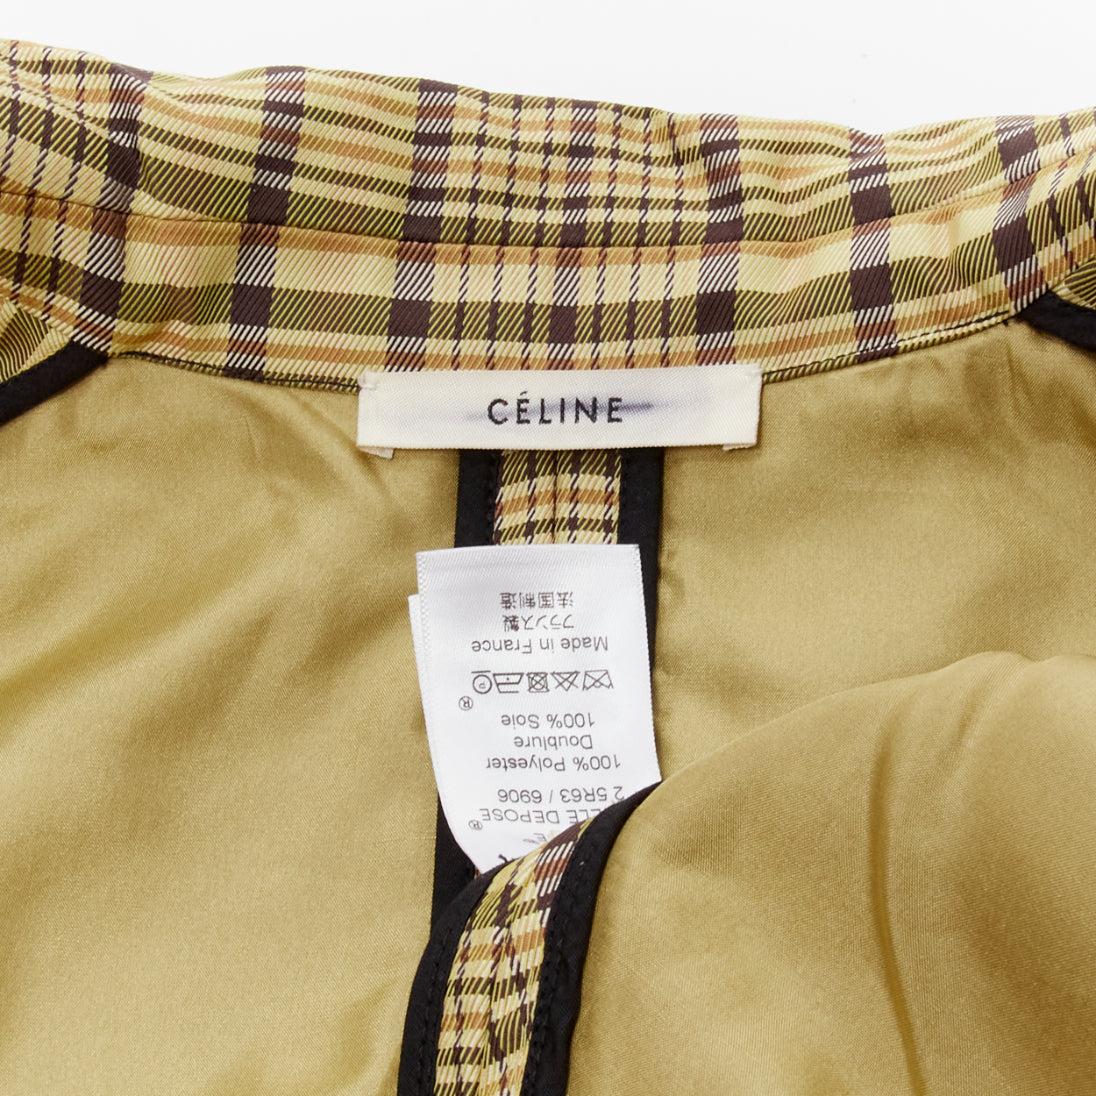 OLD CELINE Phoebe Philo 2016 Runway beige checked cinched waist jacket FR34 XS For Sale 5